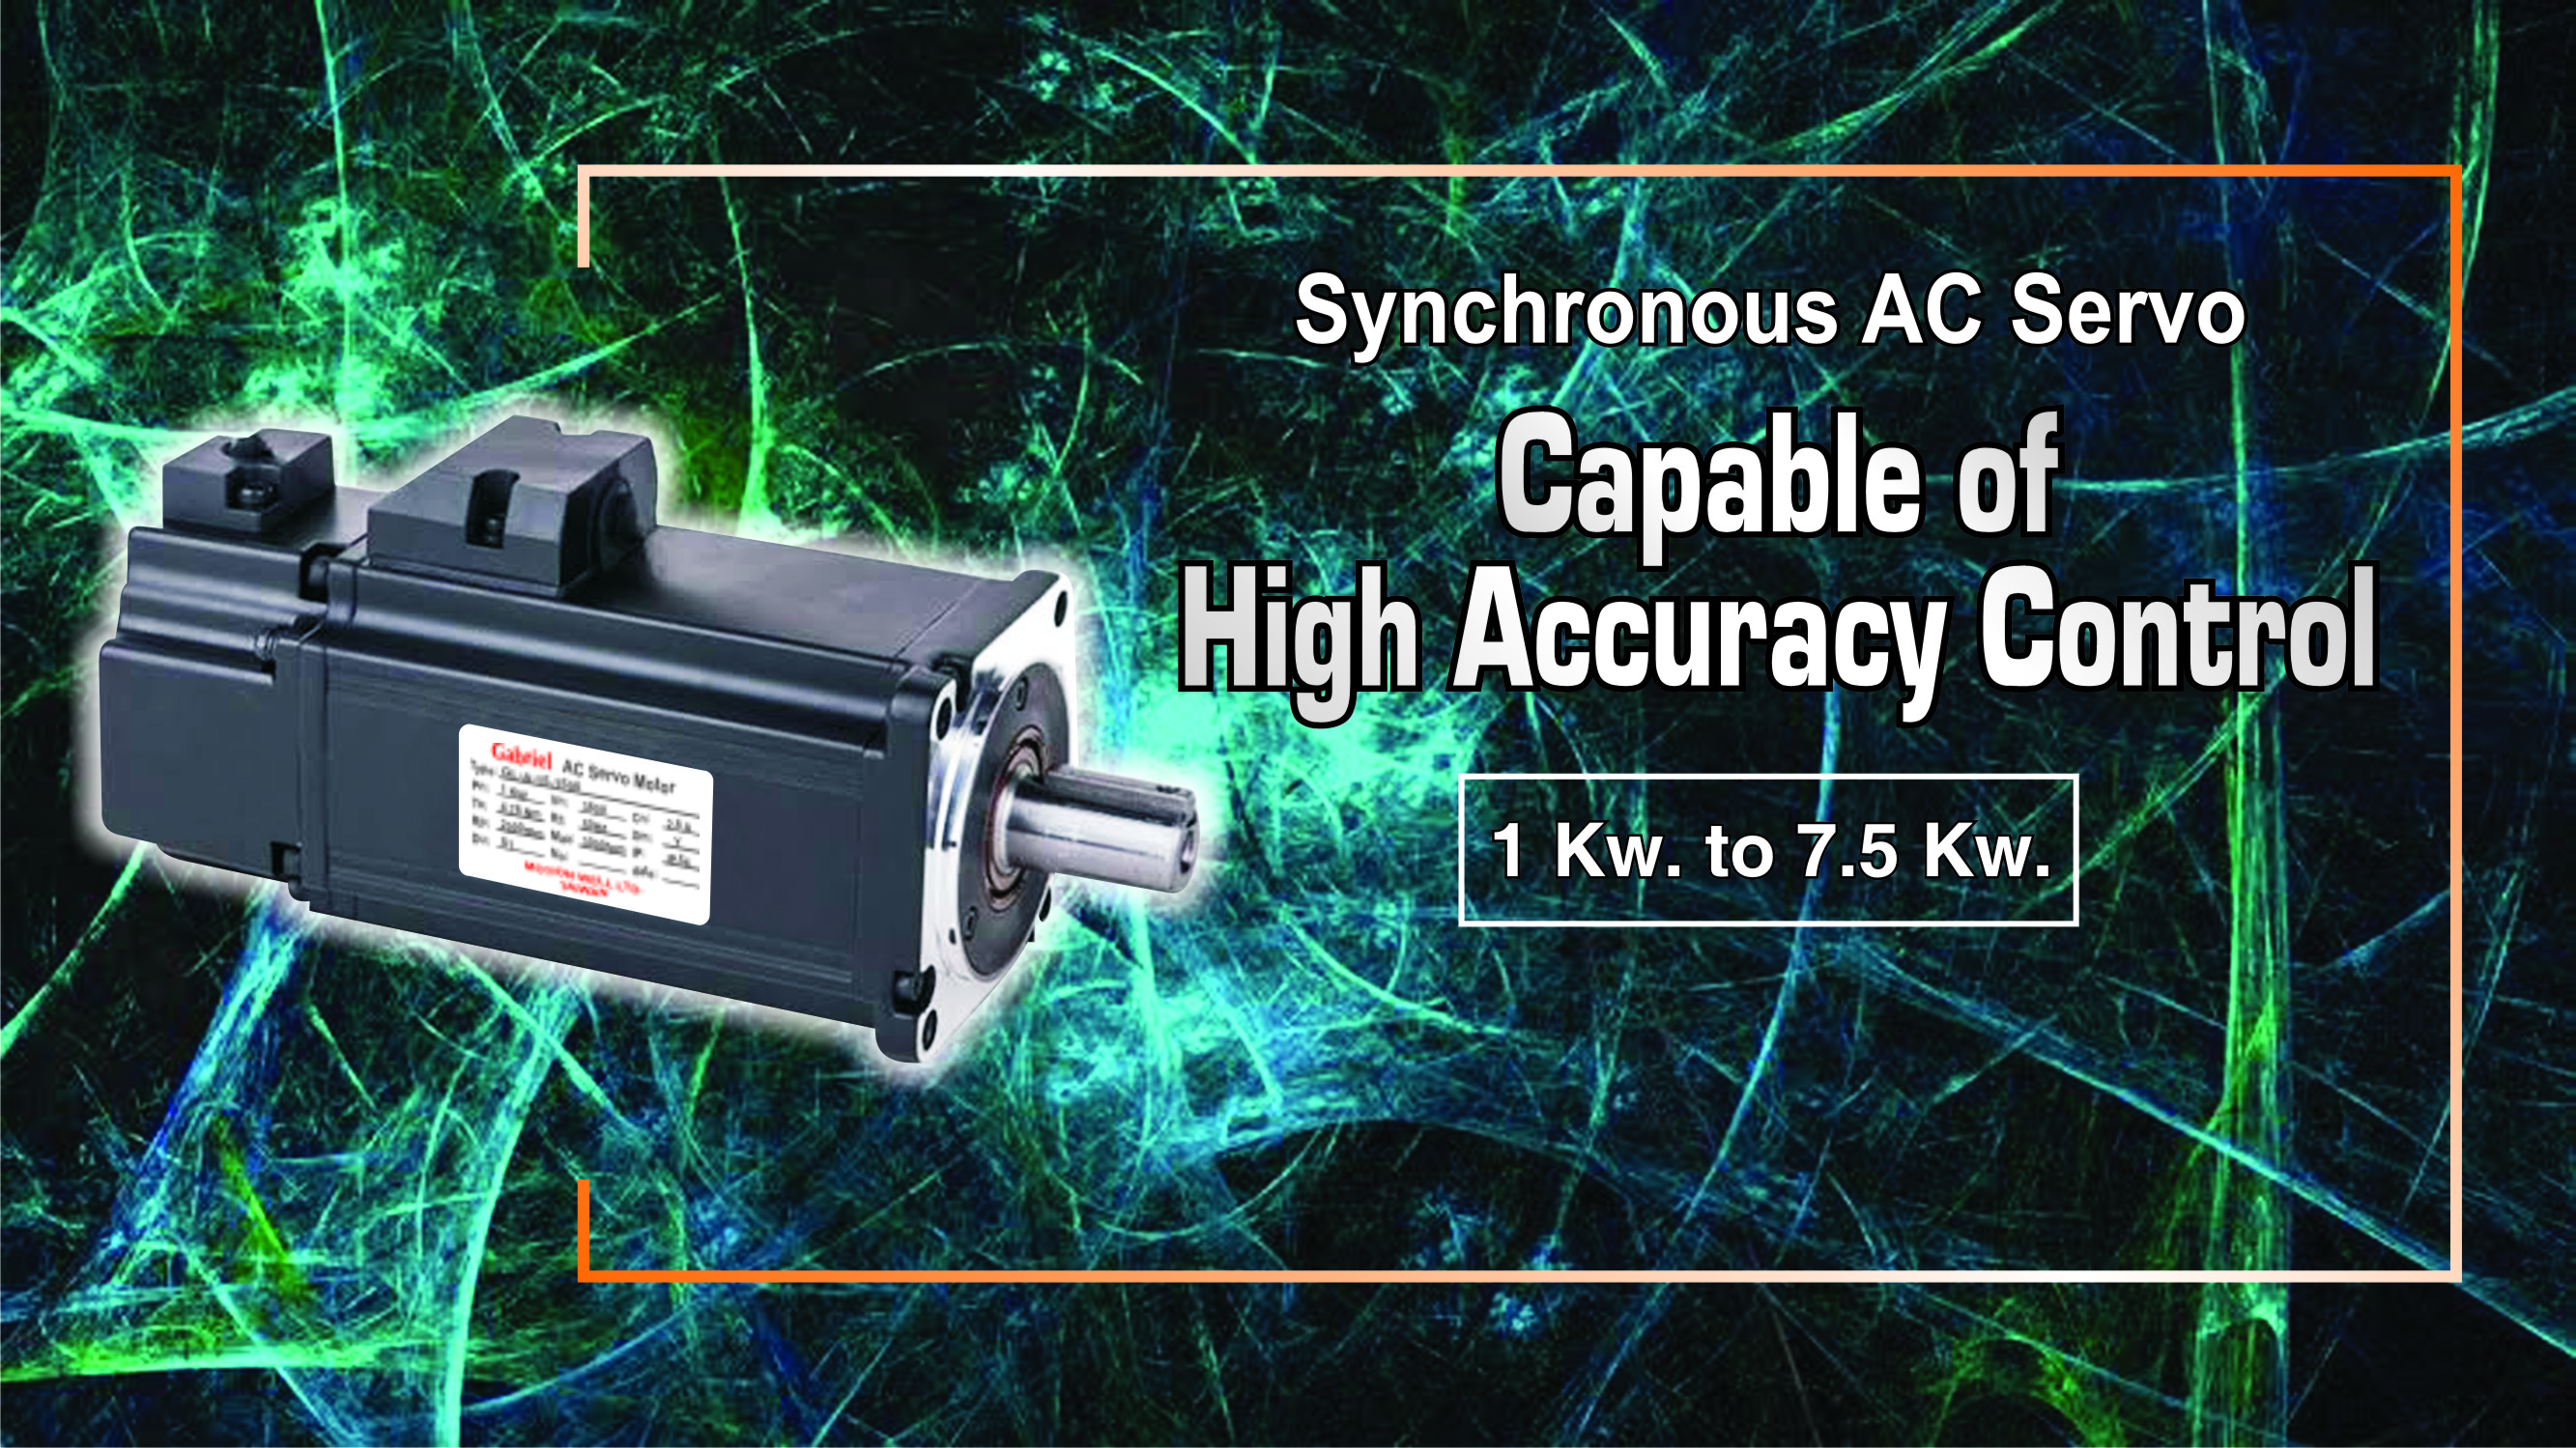 High Accuracy Control with 1 Kw. to 7.5 Kw - Synchronous AC Servo Motors